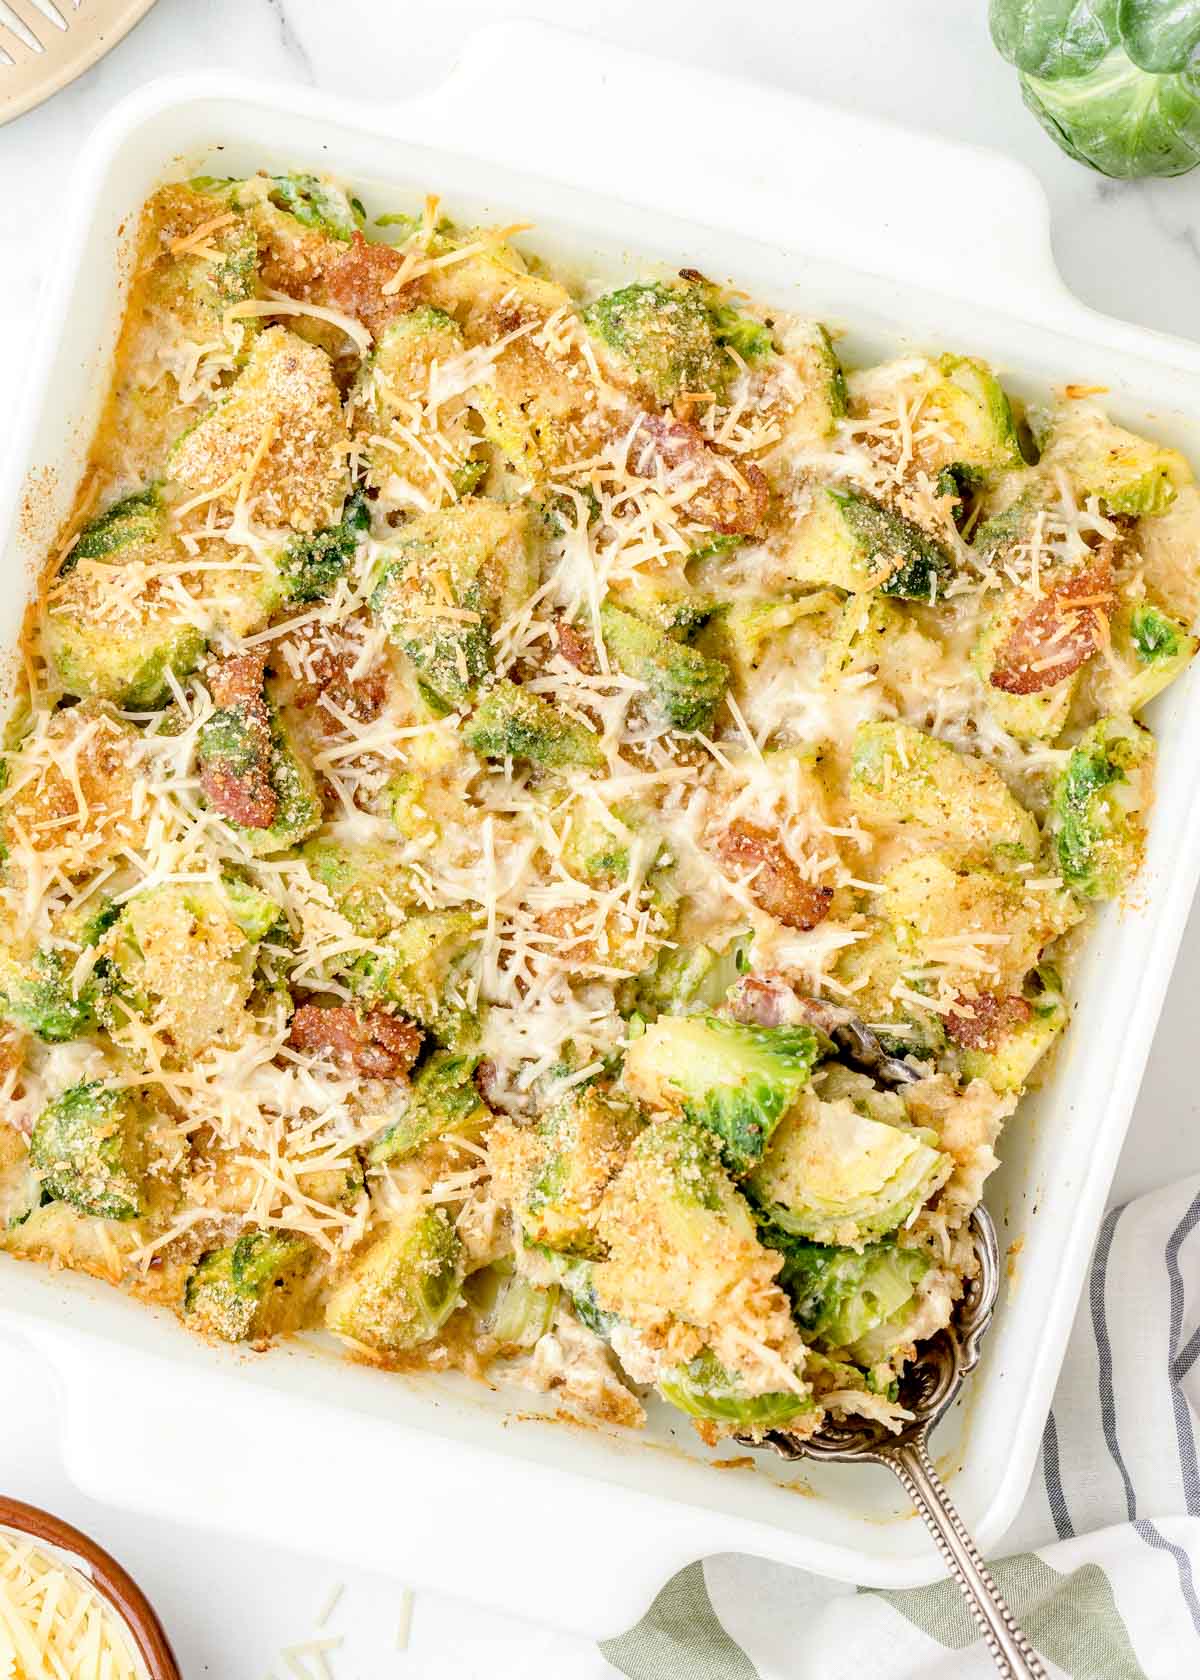 Brussel sprout casserole with bacon and cheese